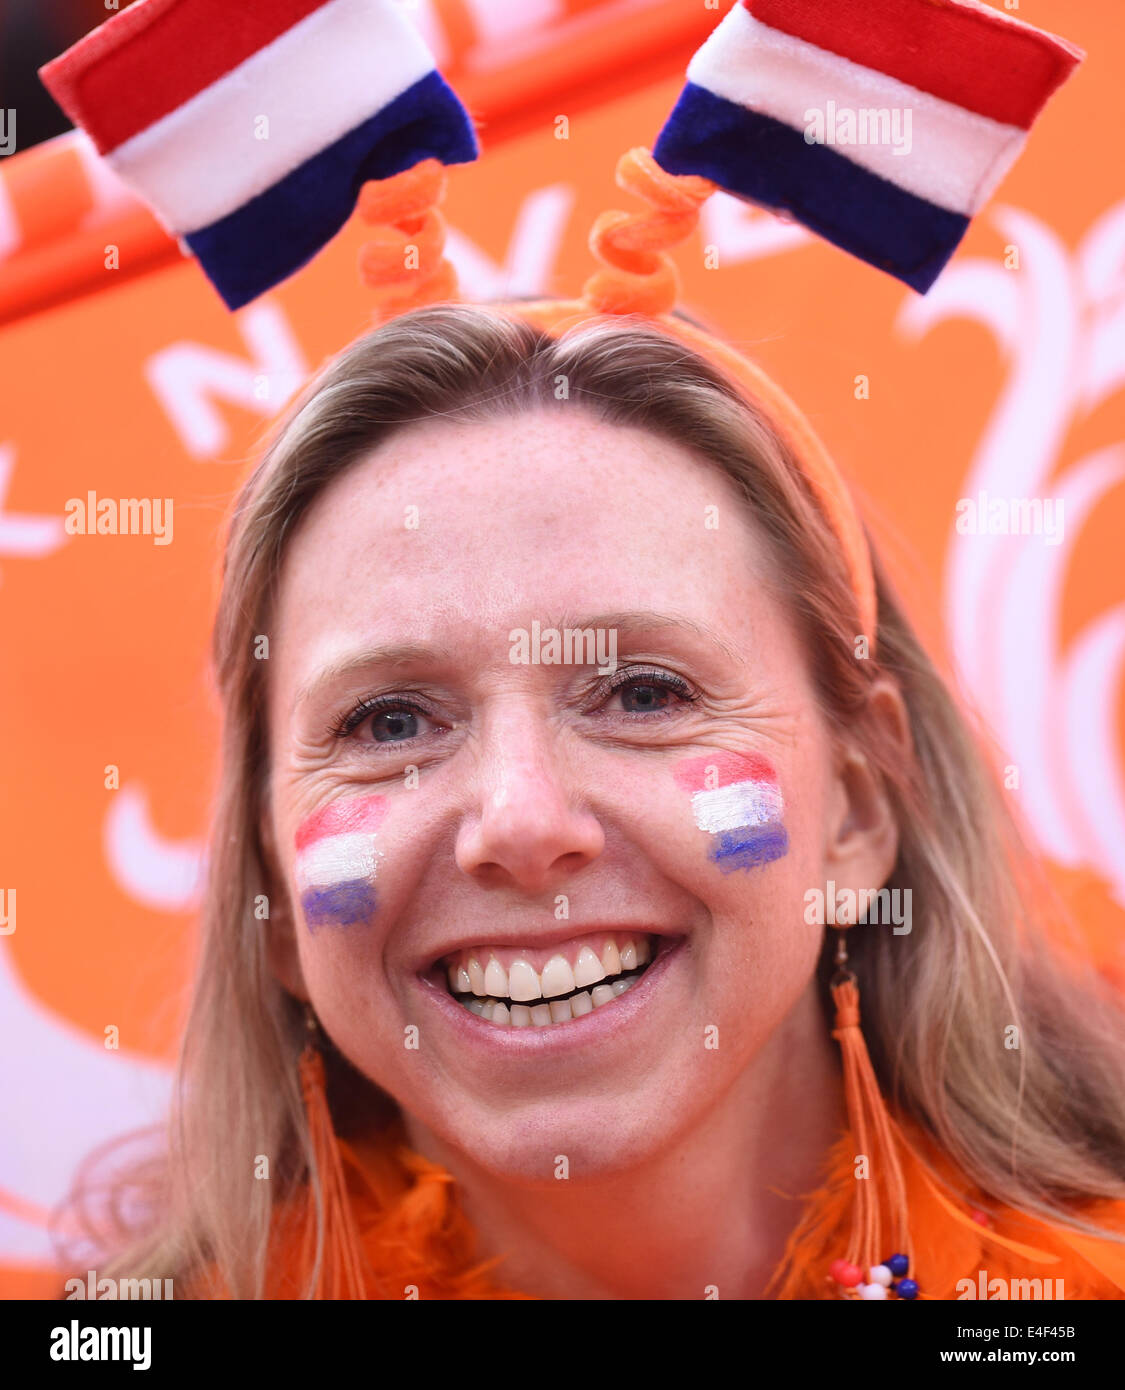 Sao Paulo, Brazil. 09th July, 2014. Supporter of the Netherlands cheers before the FIFA World Cup 2014 semi-final soccer match between the Netherlands and Argentina at the Arena Corinthians in Sao Paulo, Brazil, 09 July 2014. Photo: Marius Becker/dpa/Alamy Live News Stock Photo